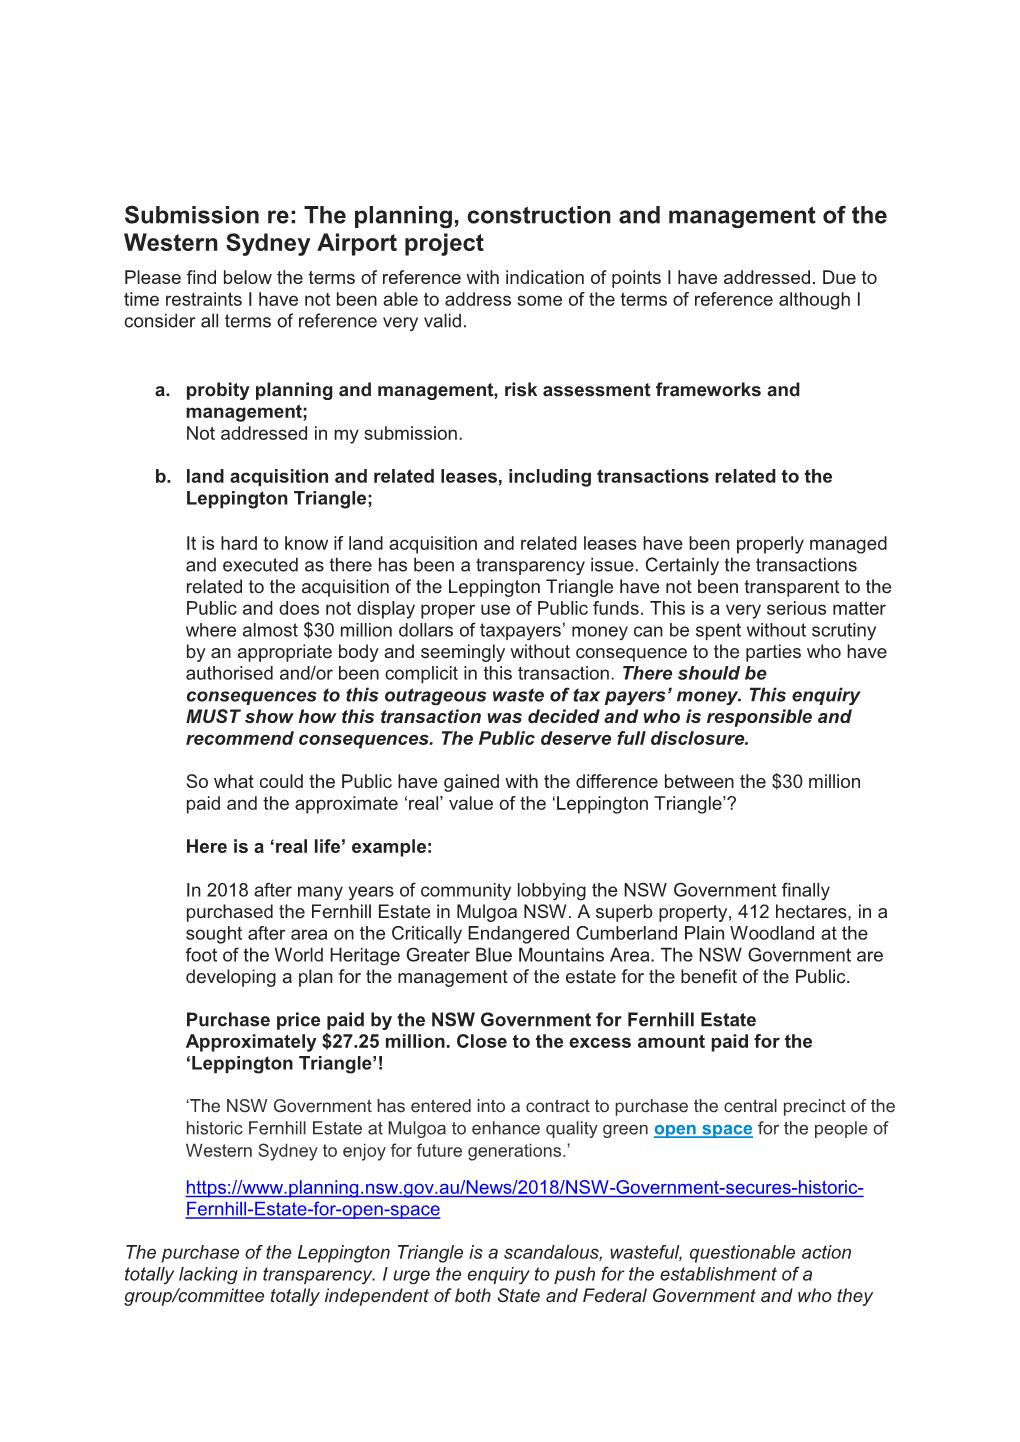 Submission Re: the Planning, Construction and Management of the Western Sydney Airport Project